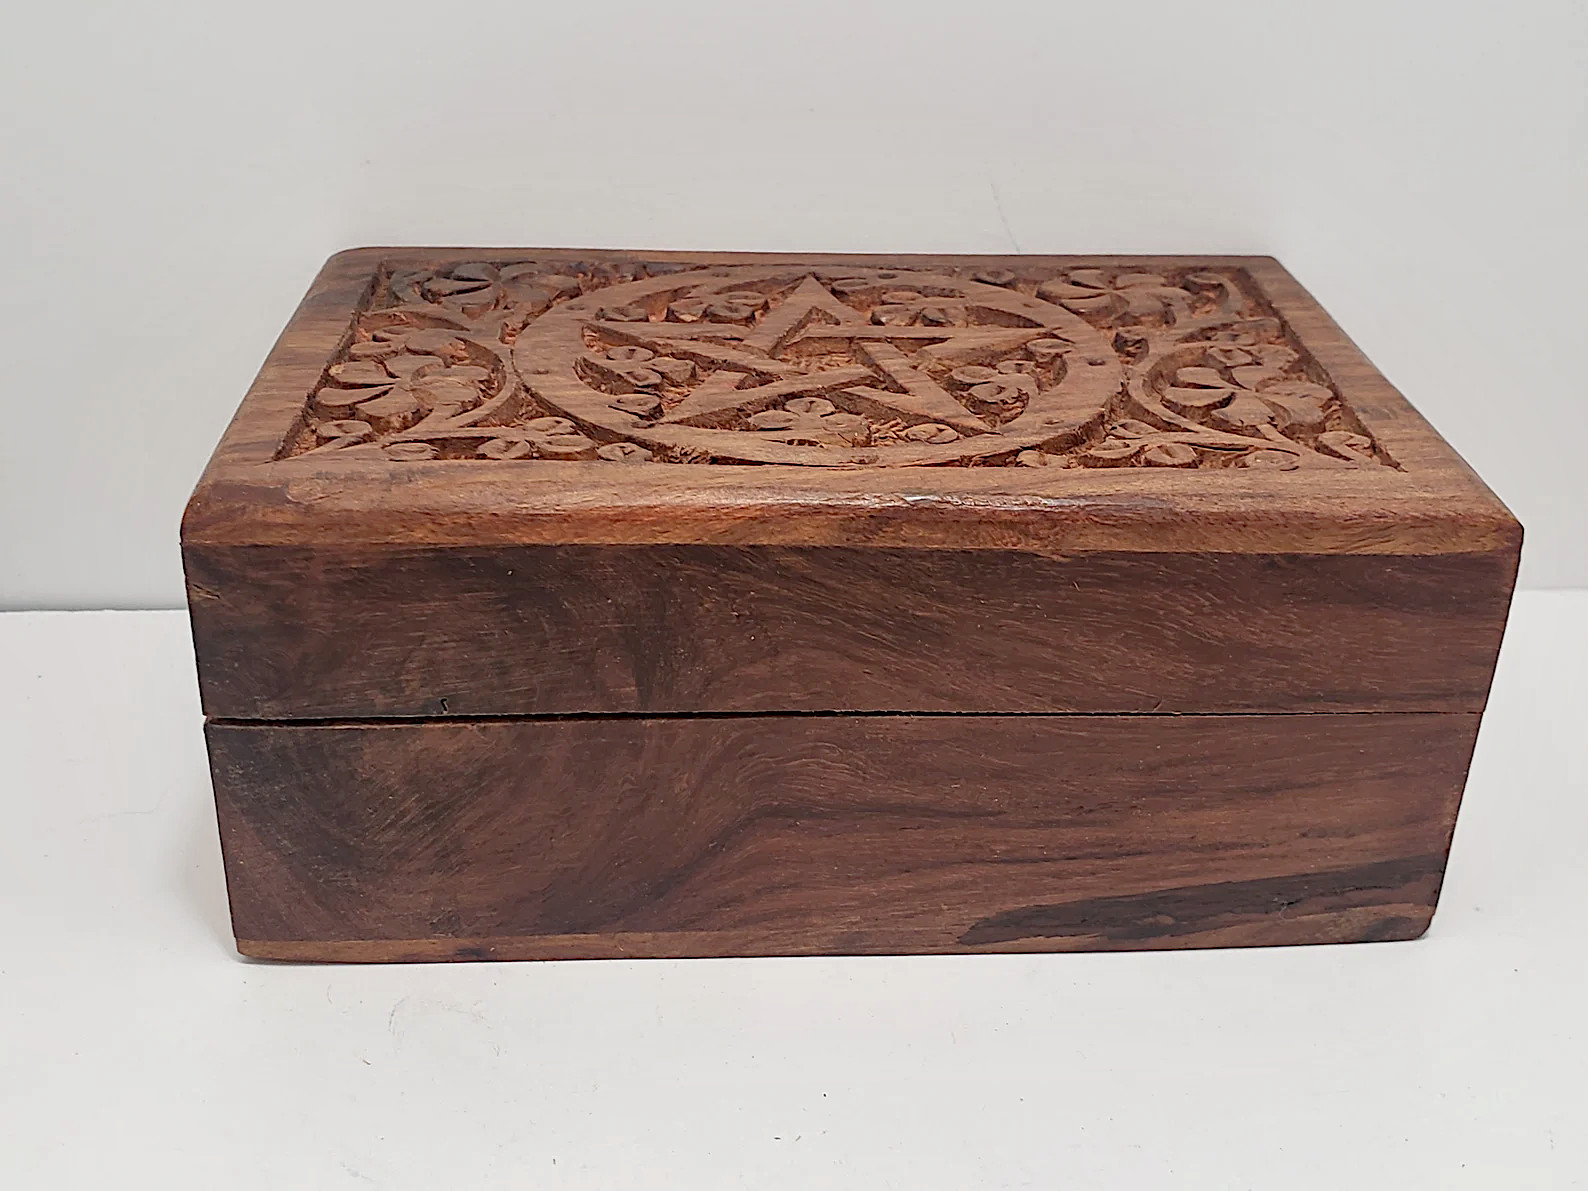 Pentacle floral carved wood box 4x6 Natural finish - Click Image to Close